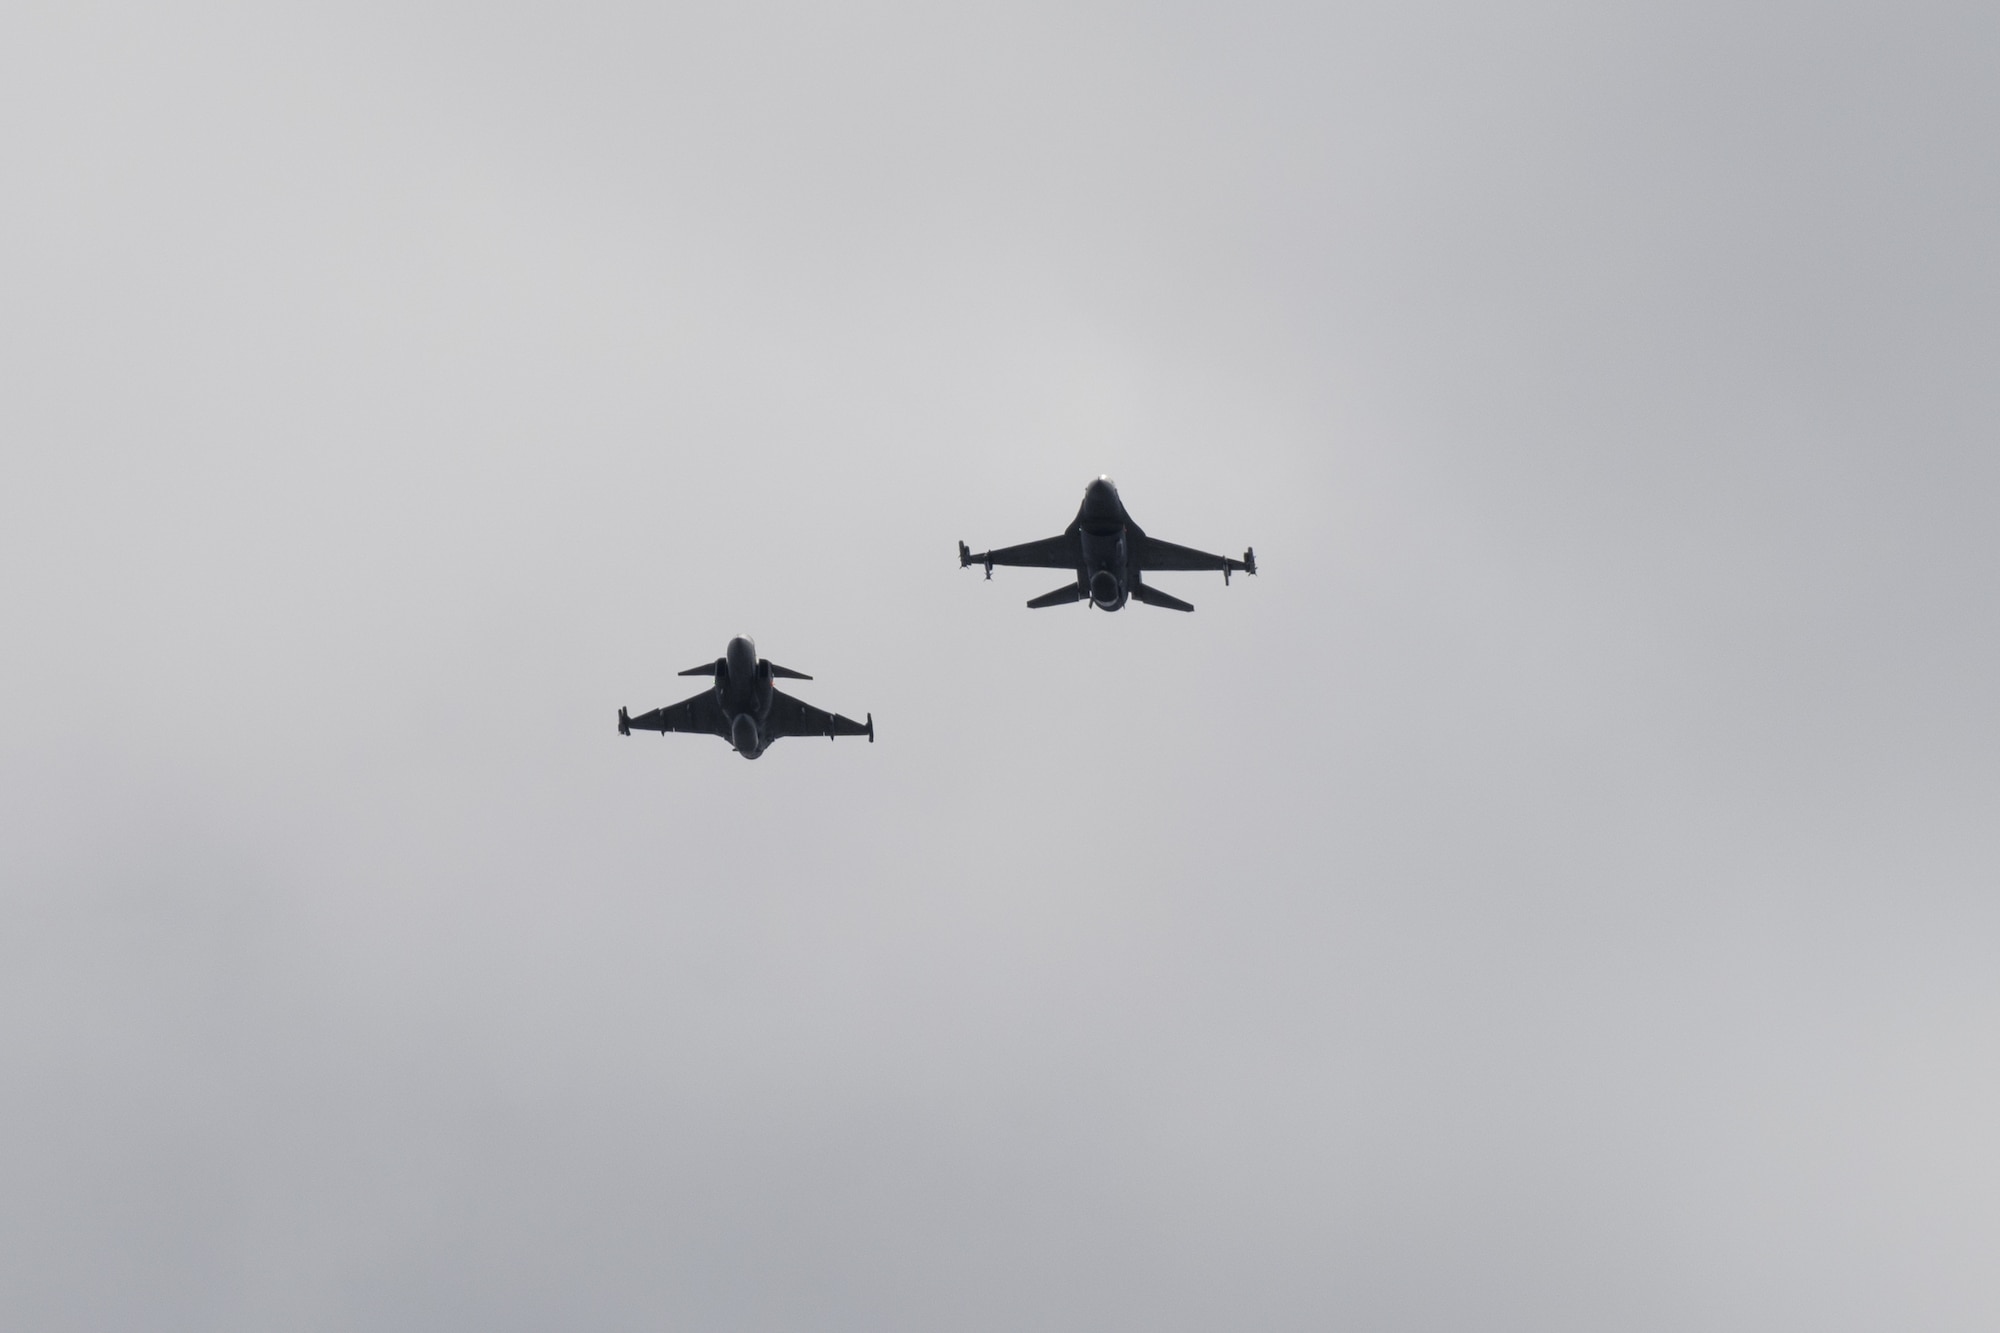 A Swedish air force JAS-39 Gripen, left, flies in formation with a U.S. Air Force F-16 assigned to the 480th Fighter Squadron at Spangdahlem Air Base, Germany, during the Arctic Challenge Exercise 21 training event over Kallax Air Base, Sweden, June 16, 2021. The aim of ACE21 is to exercise and train participating units, from Norway, Sweden, Finland, United Kingdom, Denmark, The Netherlands and Germany in planning, command and control, orchestration and conduct of air operations in the Nordic airspace. (U.S. Air Force photo by Senior Airman Ali Stewart)